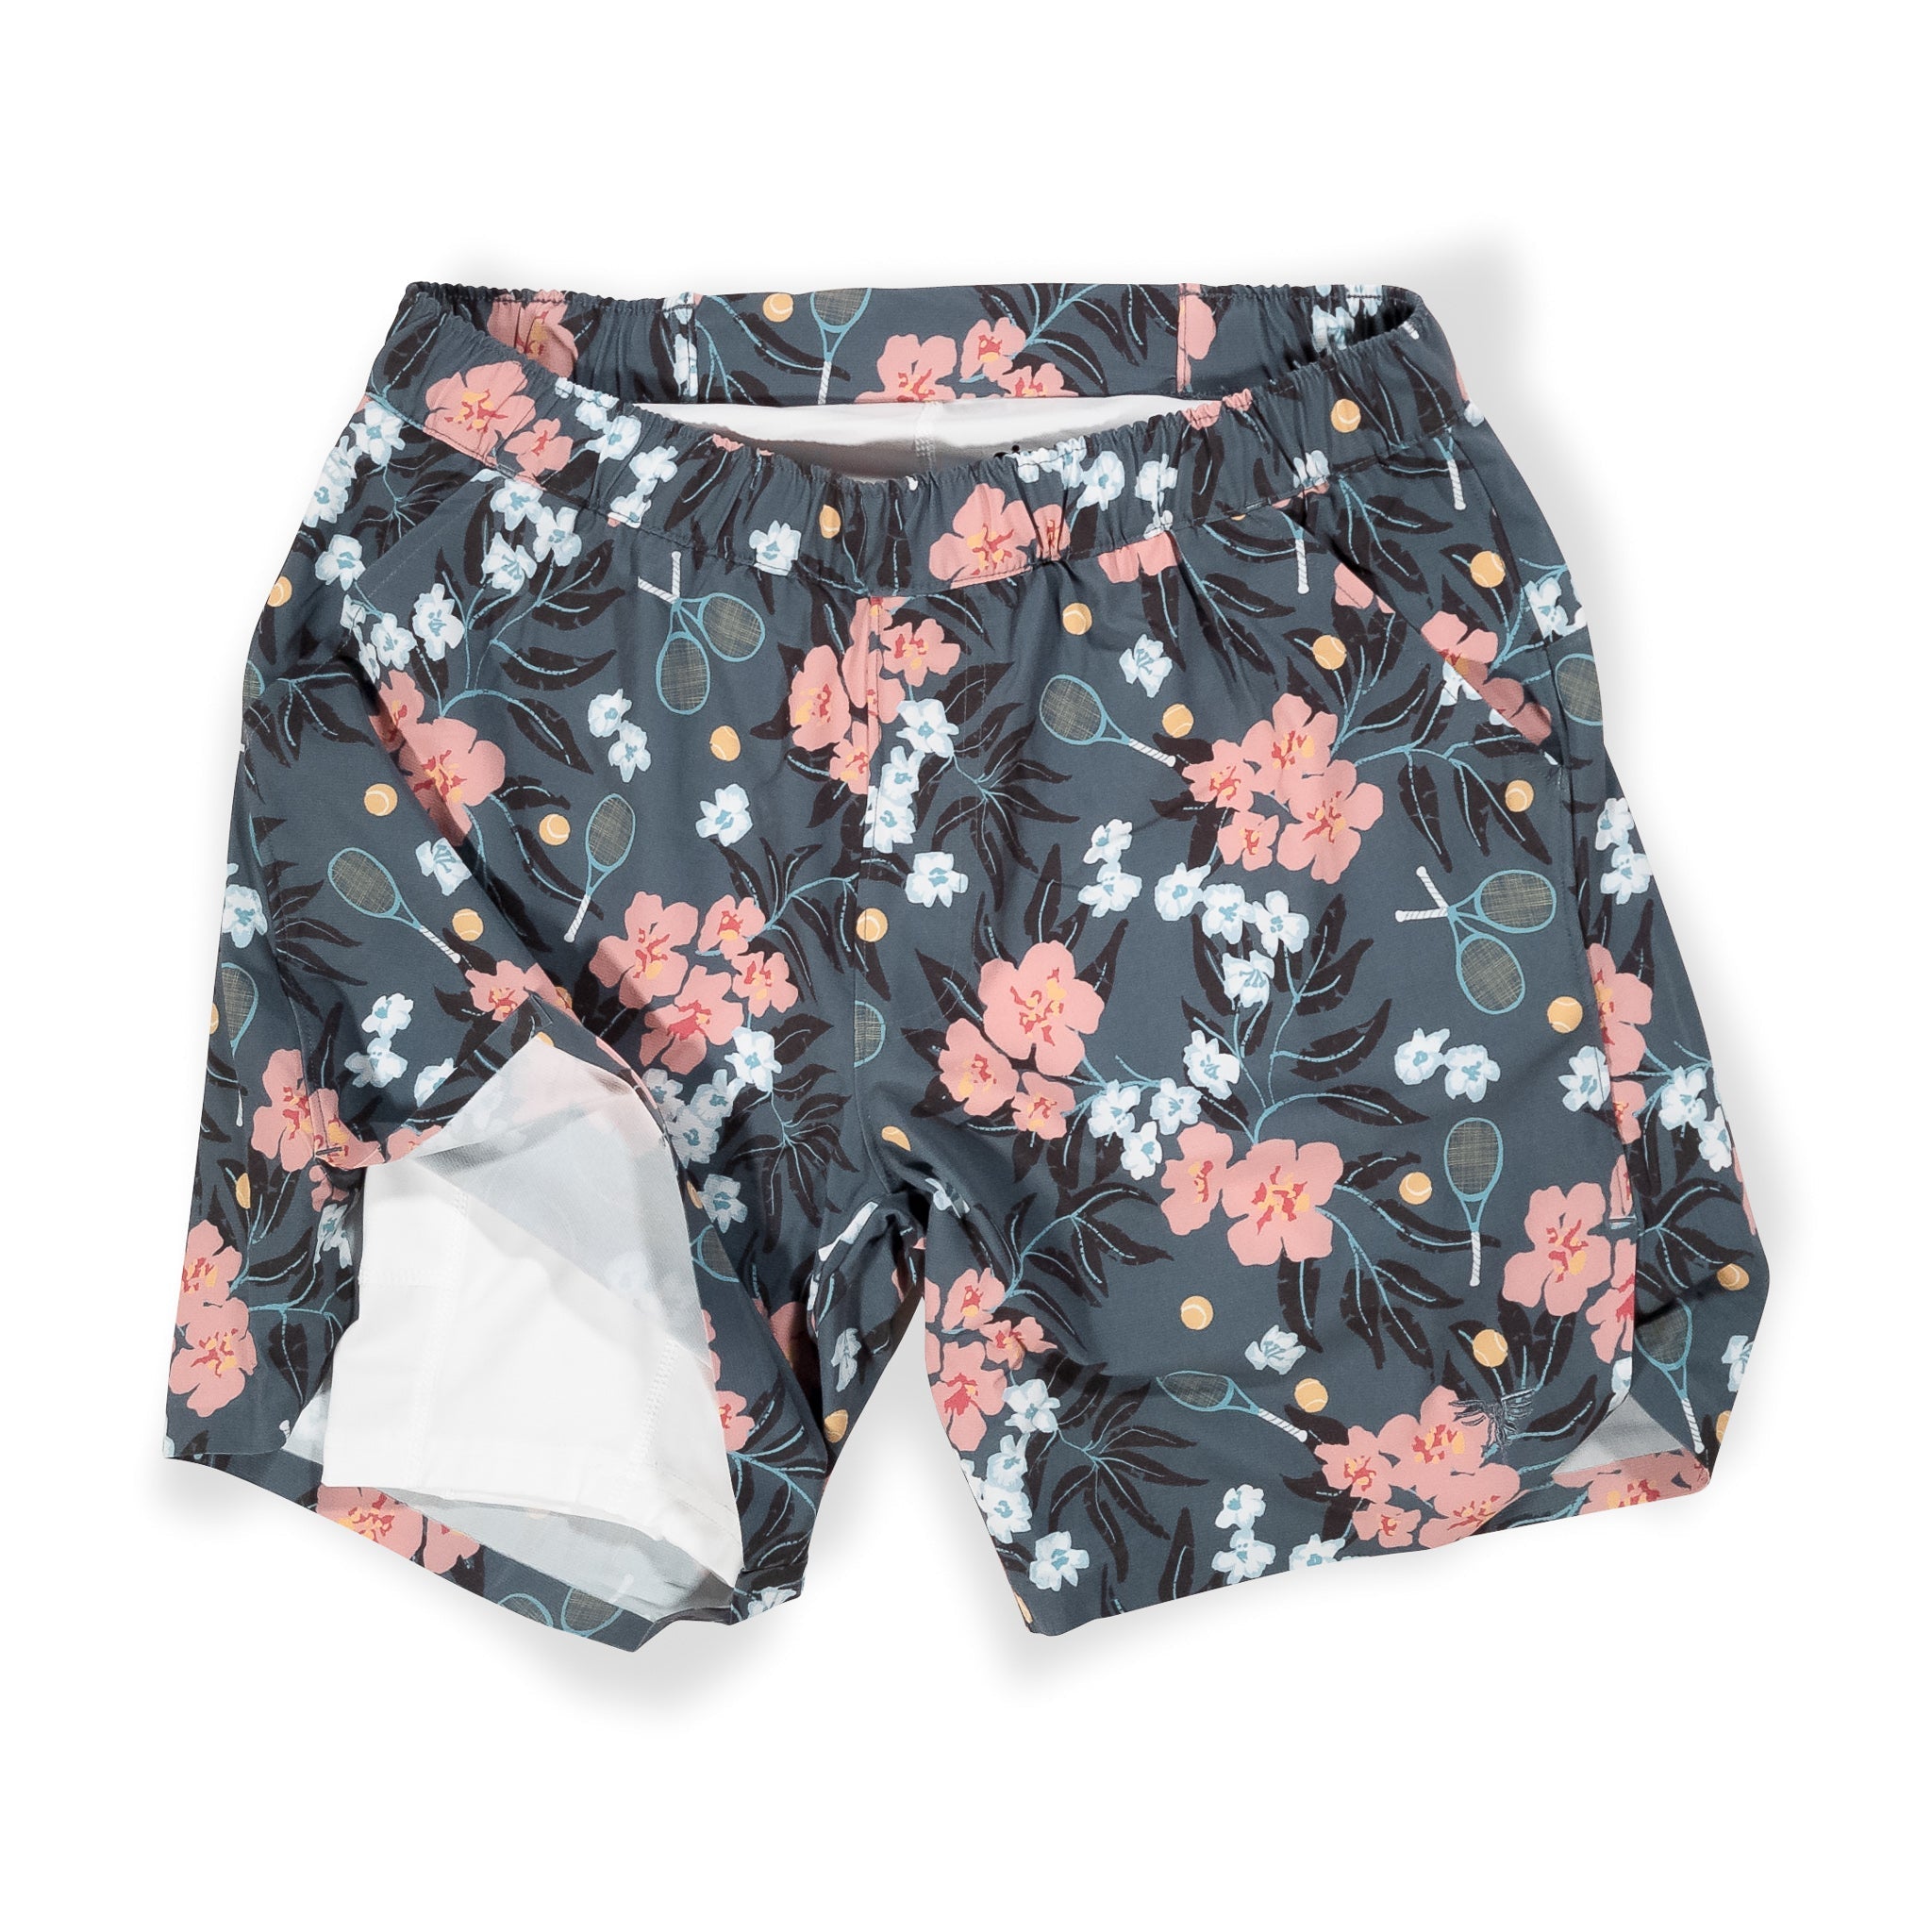 Match Shorts with Liner